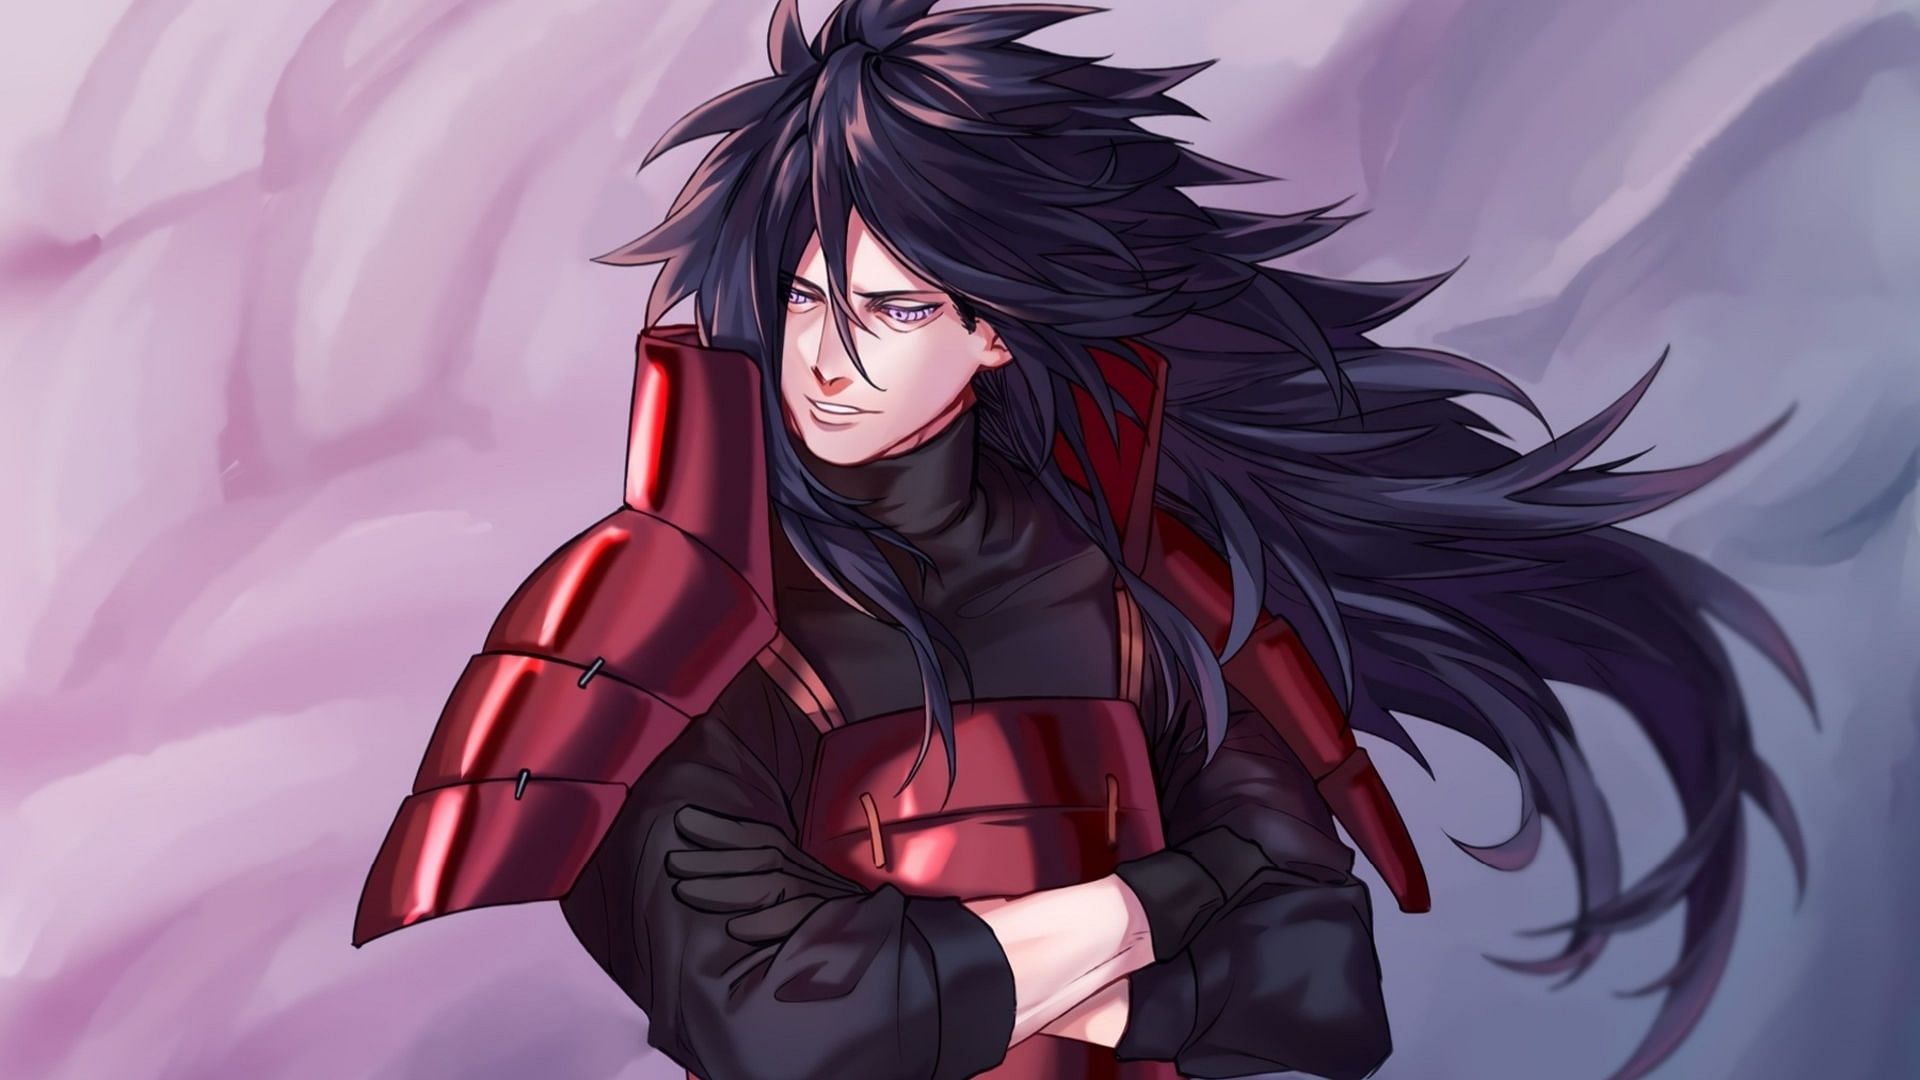 Madara Uchiha was one of the most feared characters in Naruto (Image via Pierrot)